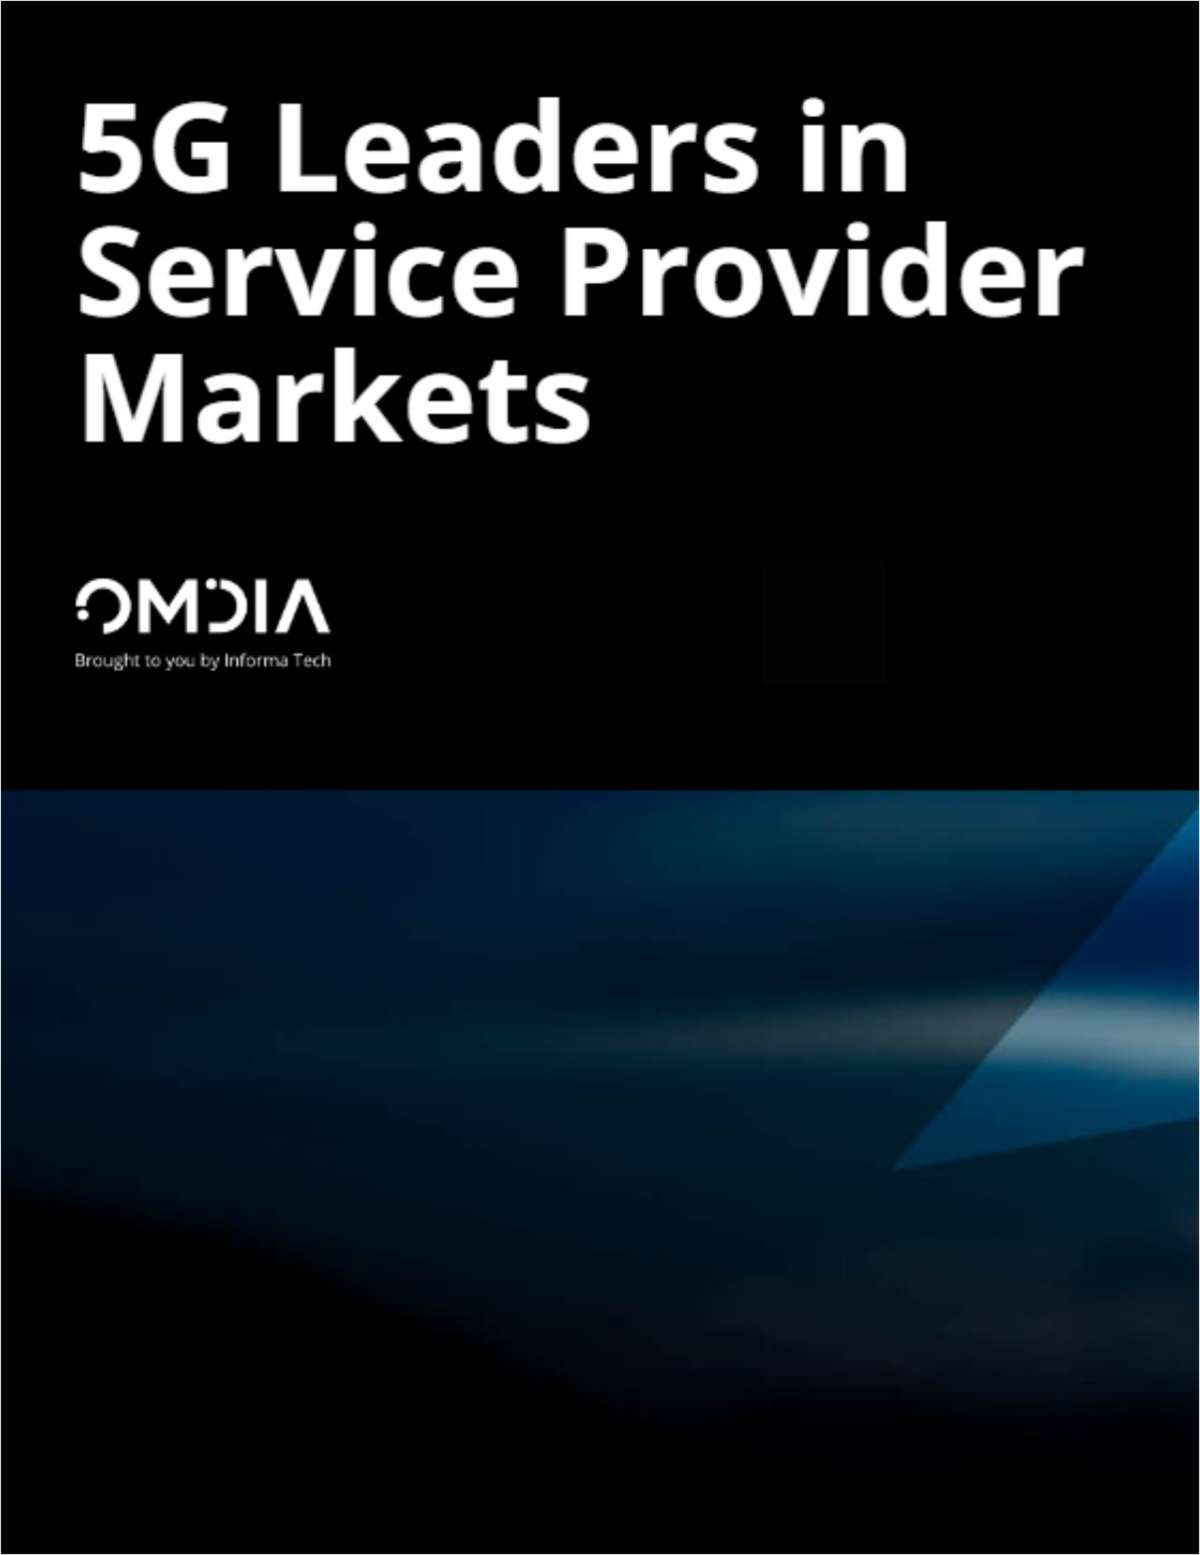 5G Leaders in Service Provider Markets